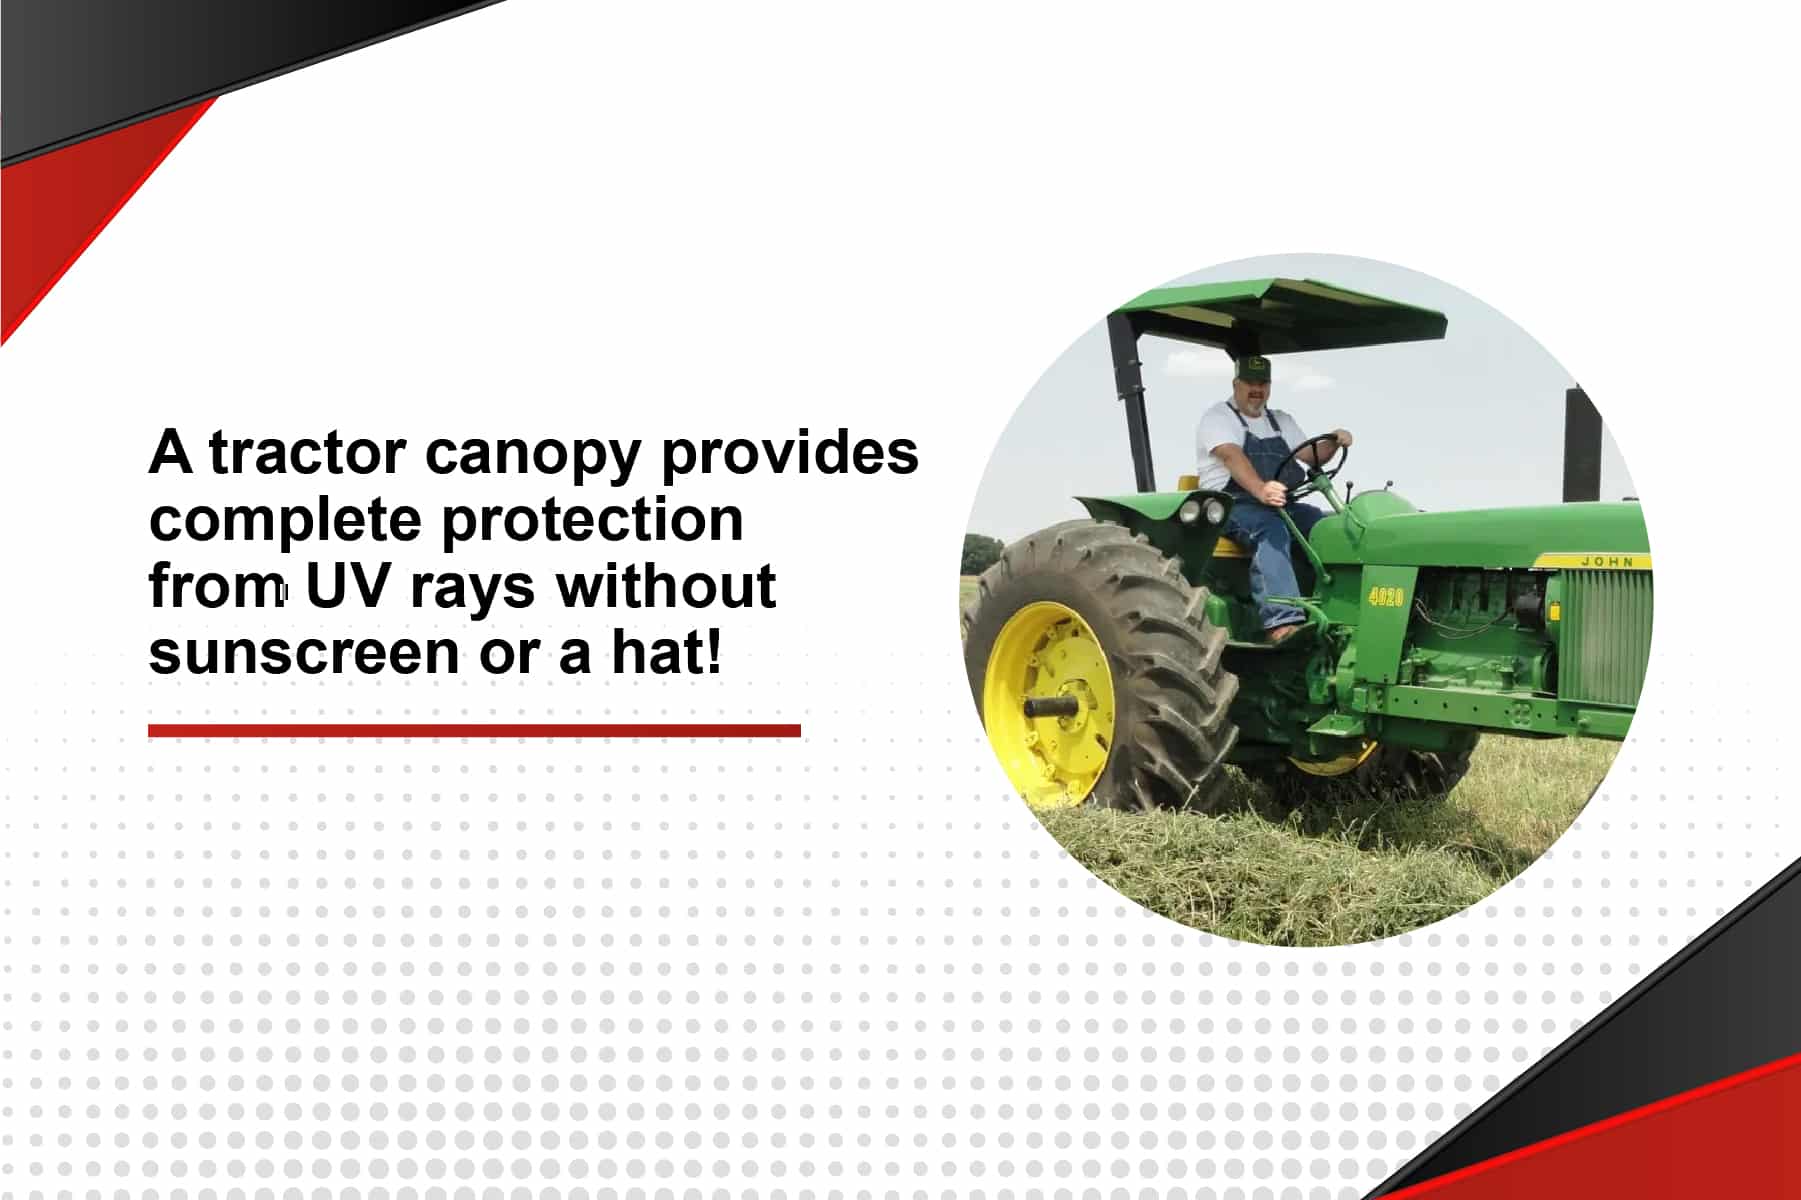 A tractor canopy provides protection from UV rays